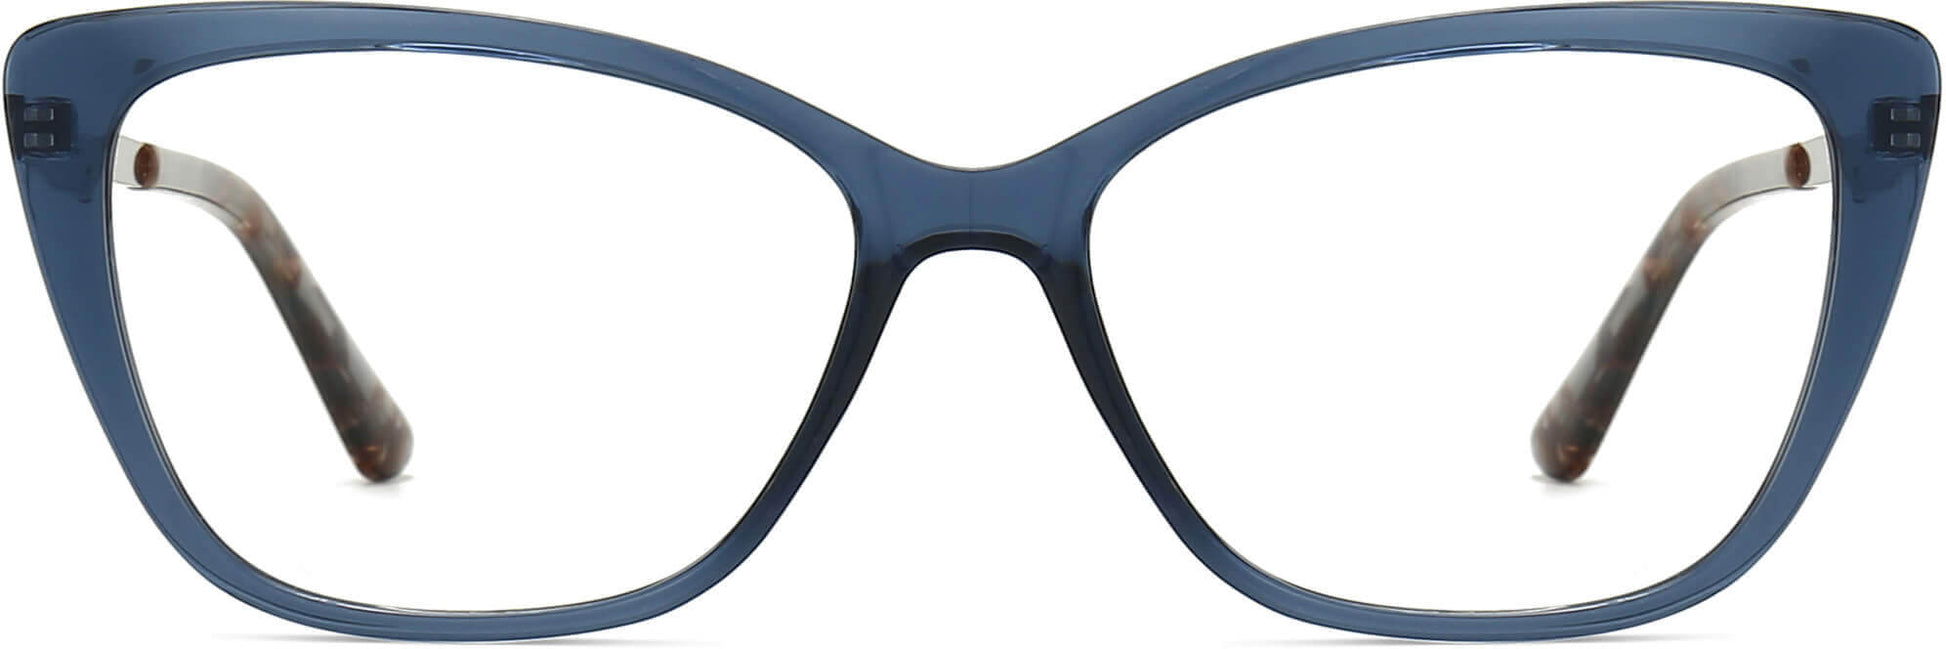 Bail Cateye Blue Eyeglasses from ANRRI, front view